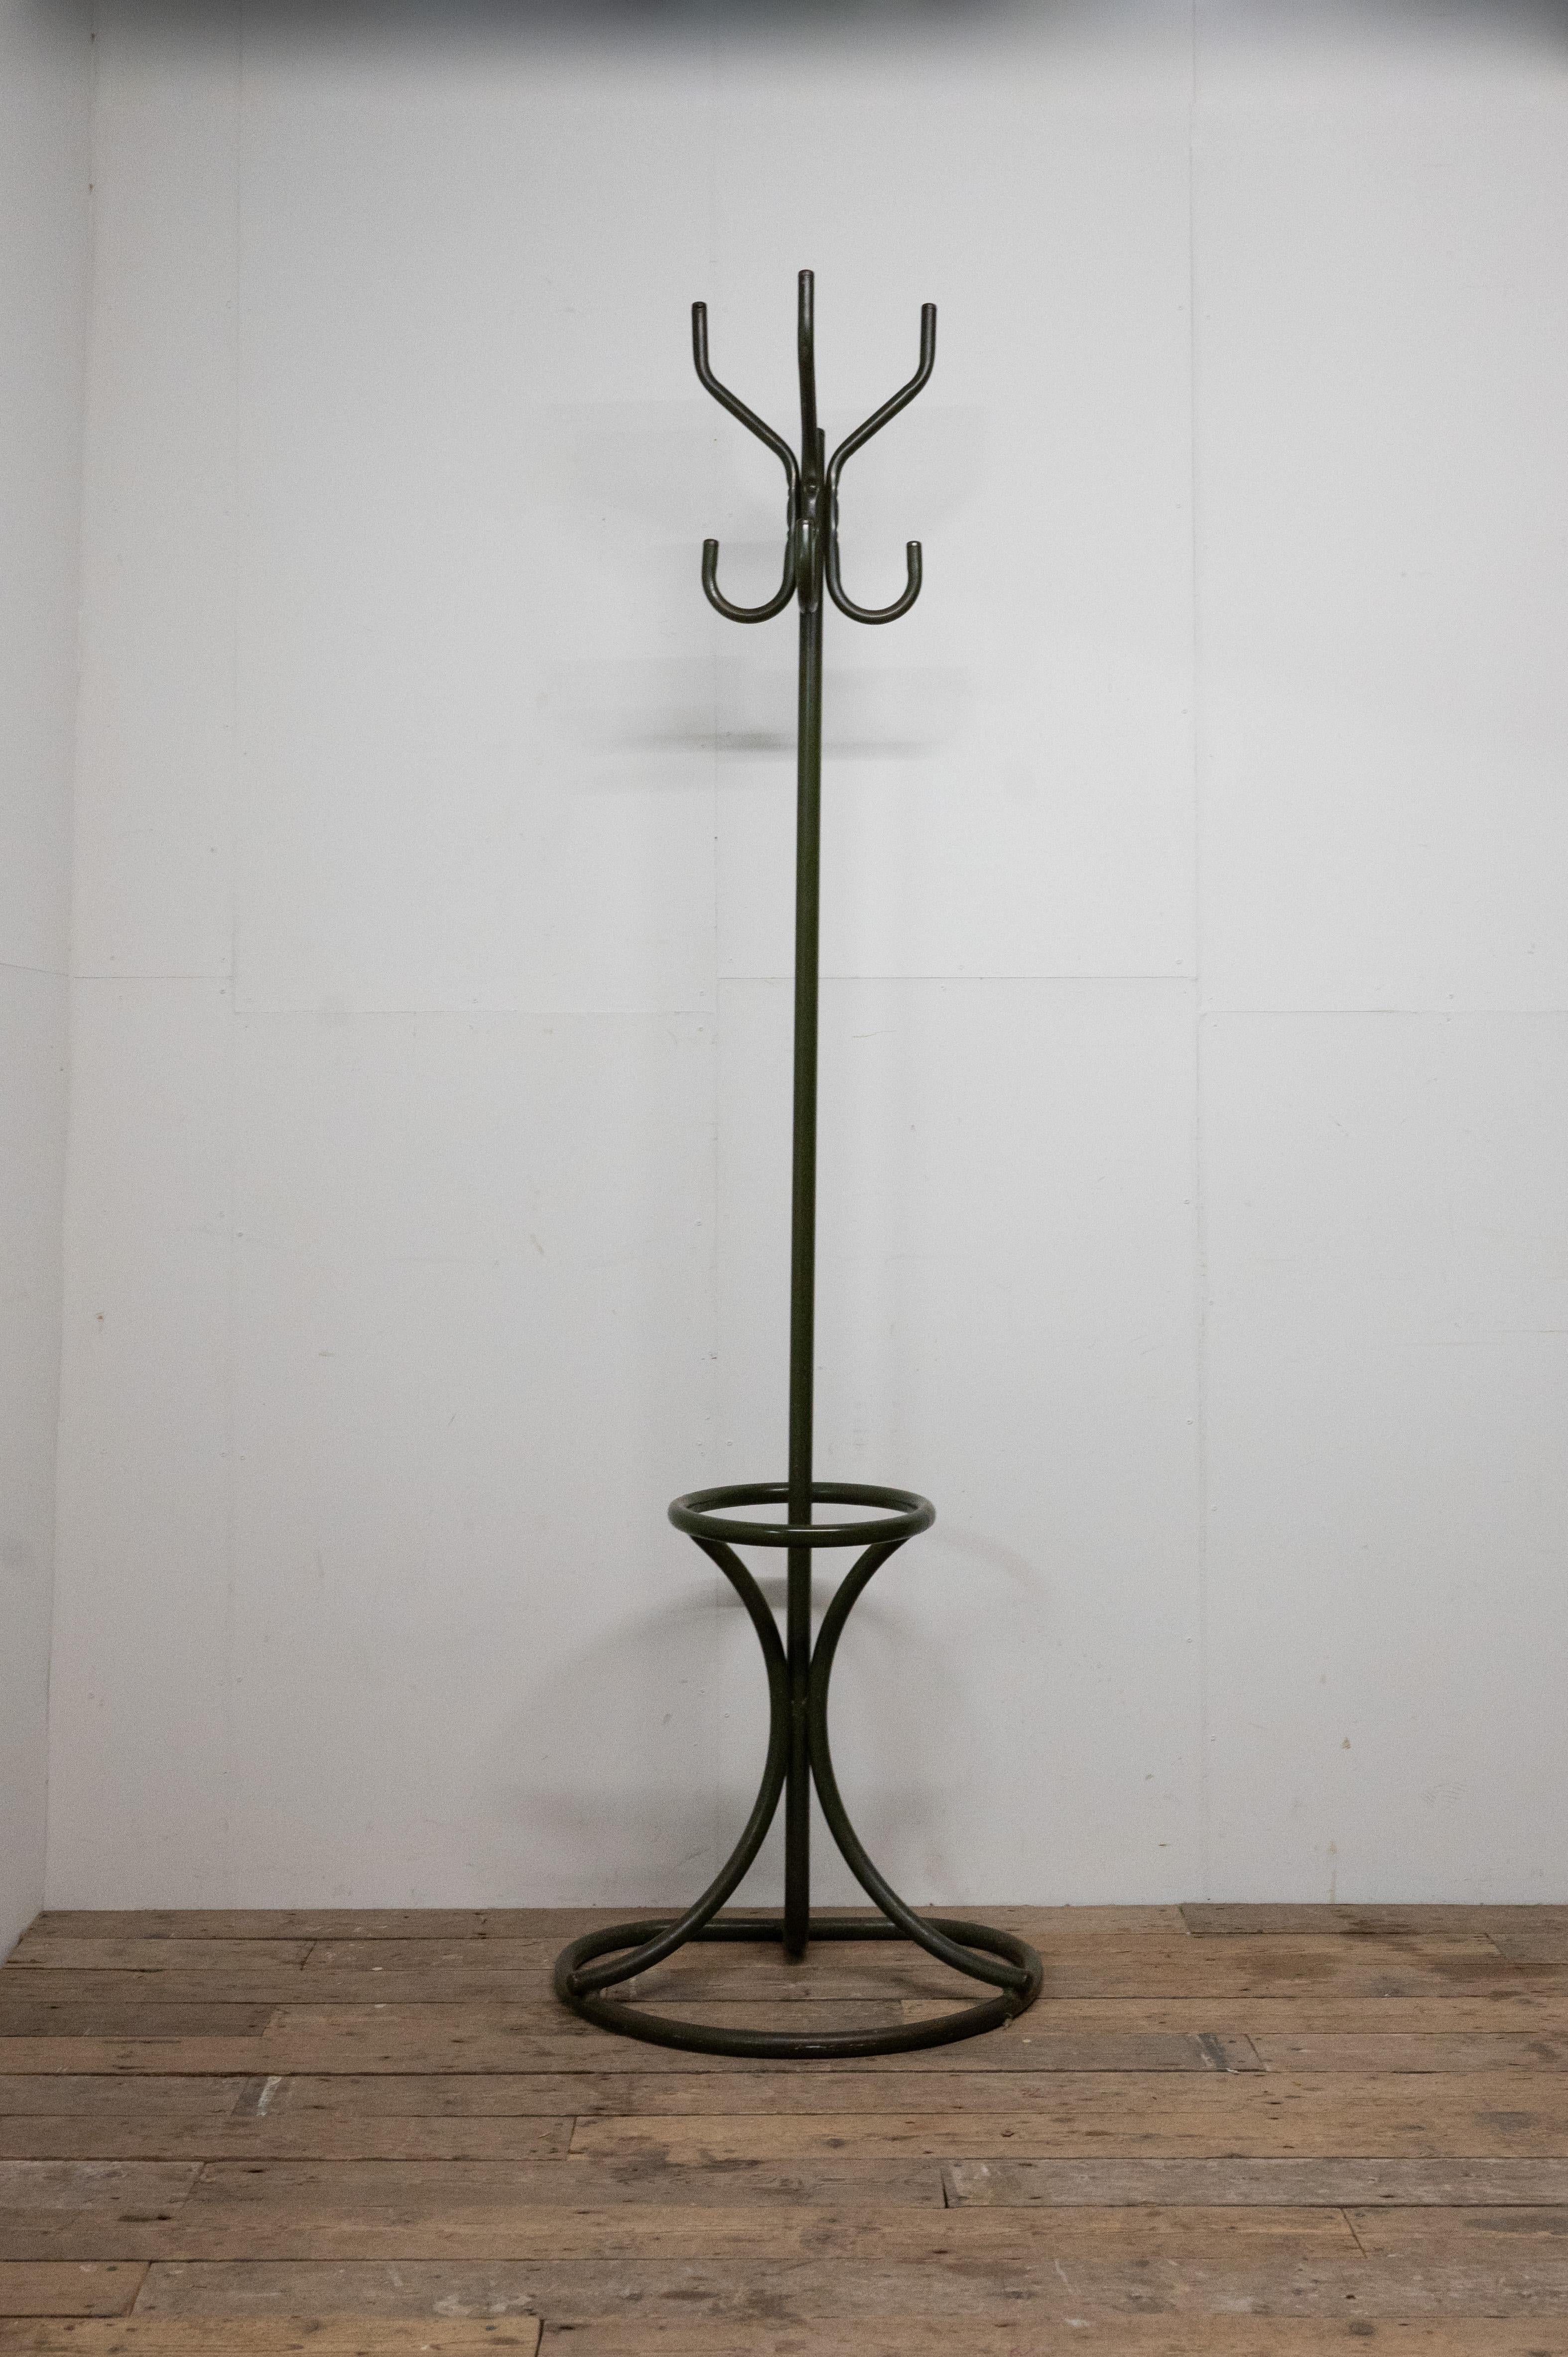 Organise your entryway with rugged elegance using this Army Green Industrial Metal Coat Stand, designed with a practical and space-saving flat-to-wall concept.
Crafted with a robust and industrial aesthetic, this coat stand boasts a utilitarian